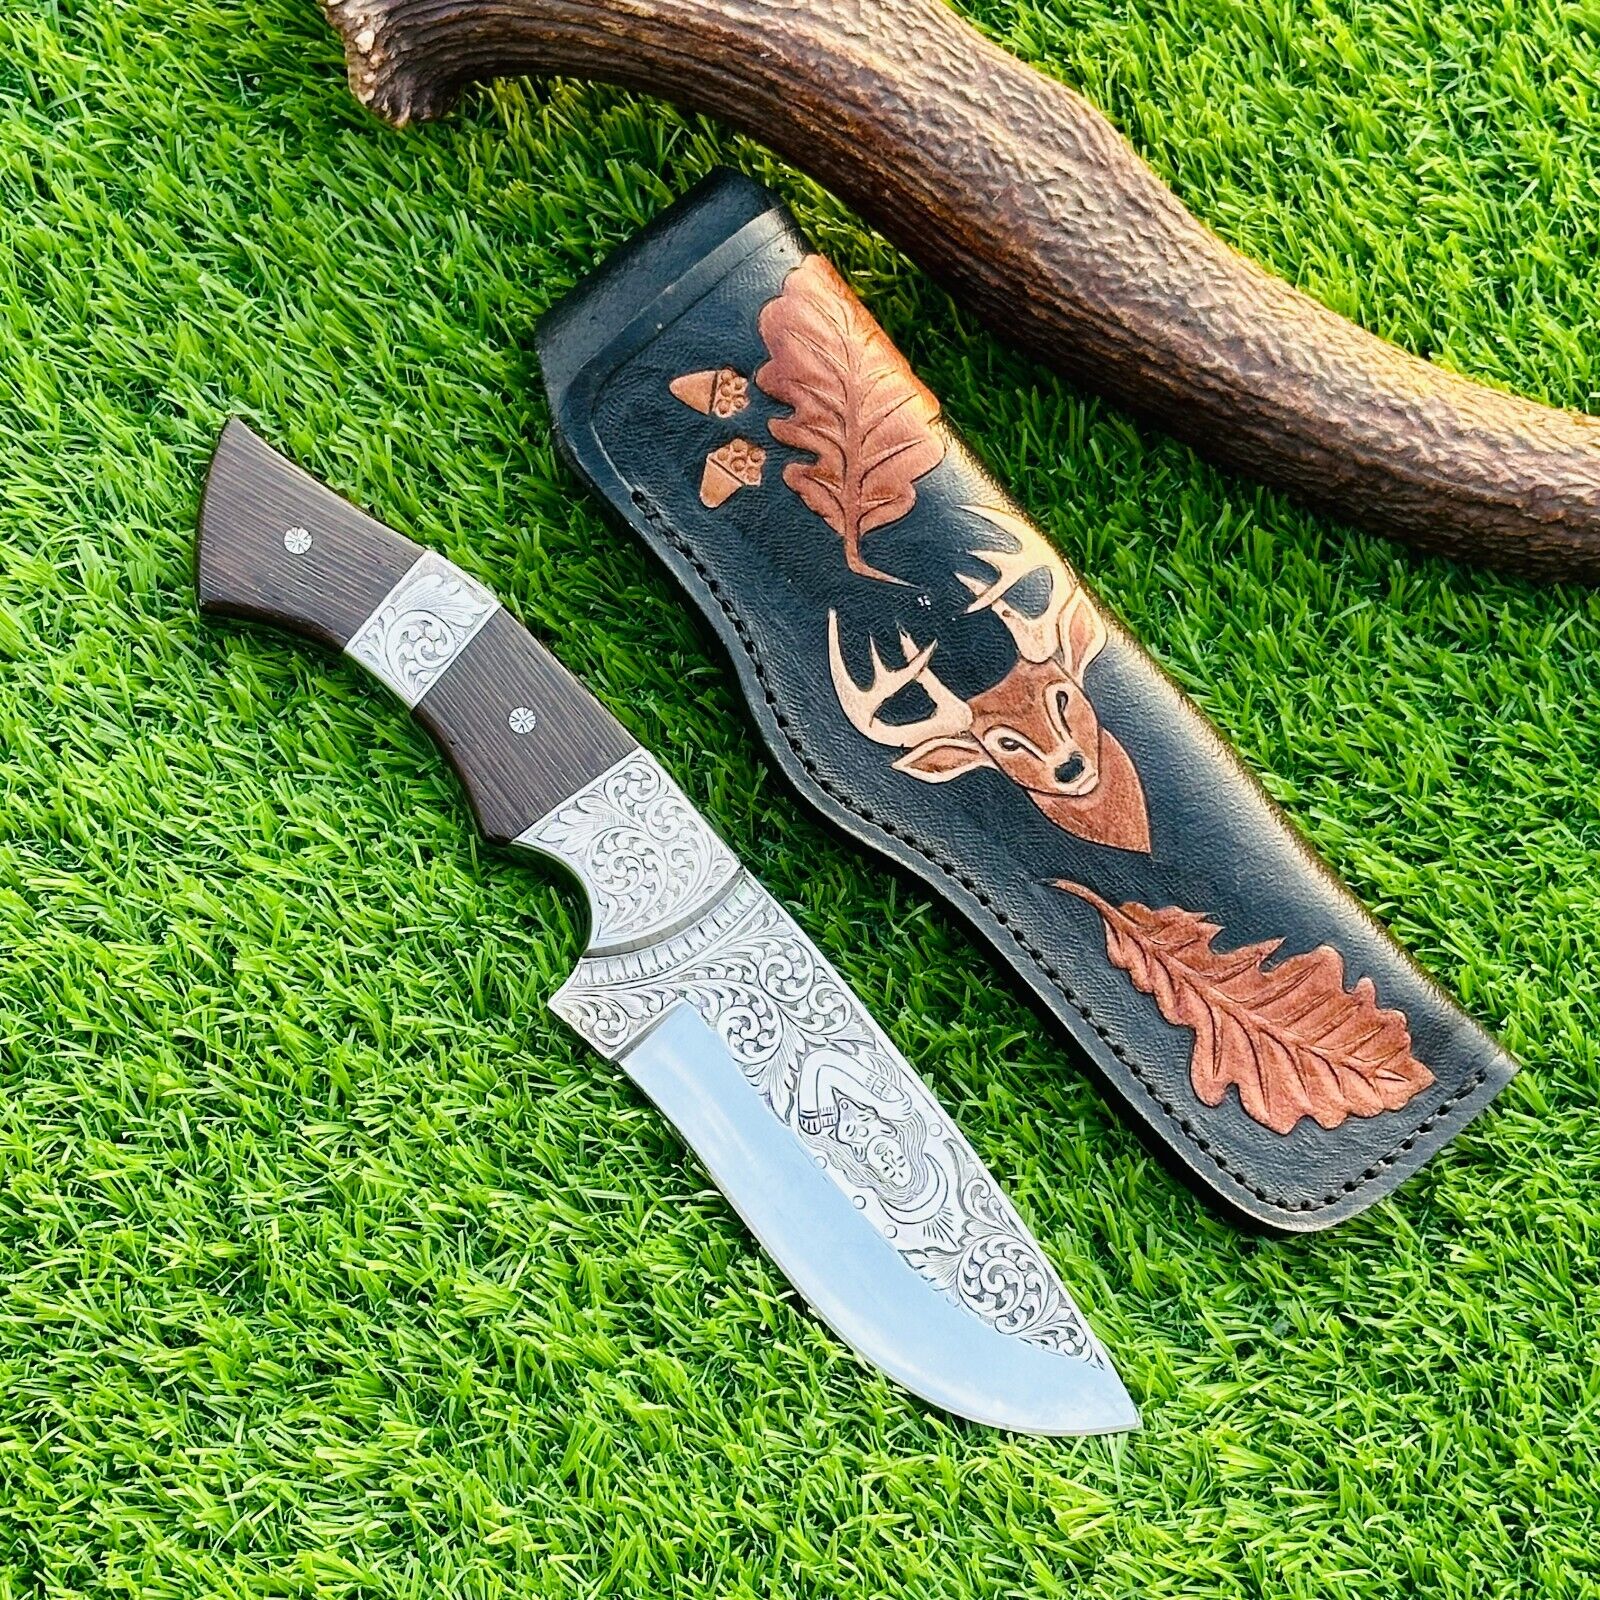 Unique Hand Engraved Knife Premium D2 Steel Hunting knife Handmade Camping Knife